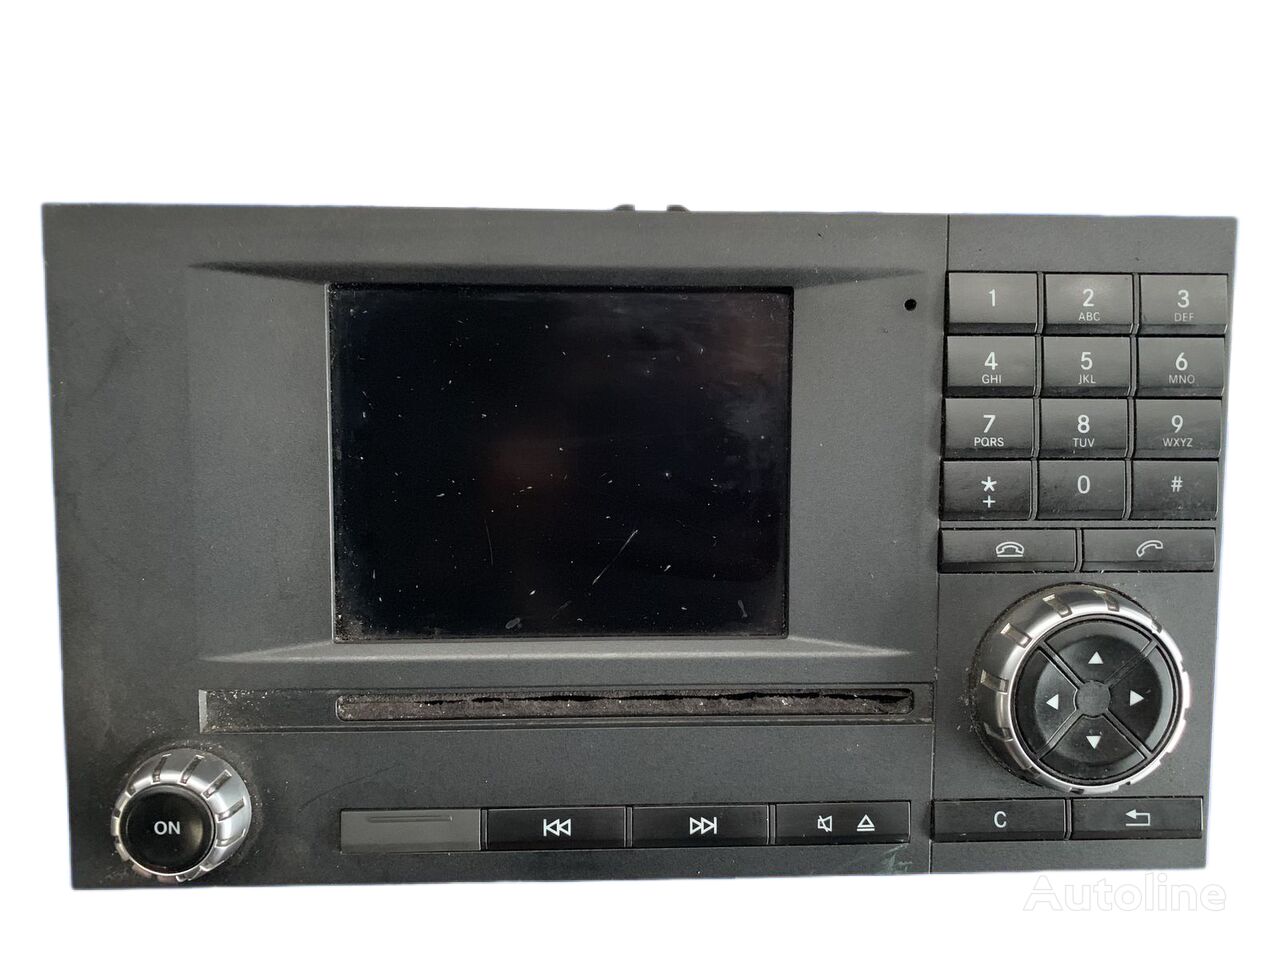 Mercedes-Benz ACTROS MP4 Euro 5 Bosch 7620000226 A0004466662 navigation system for truck tractor